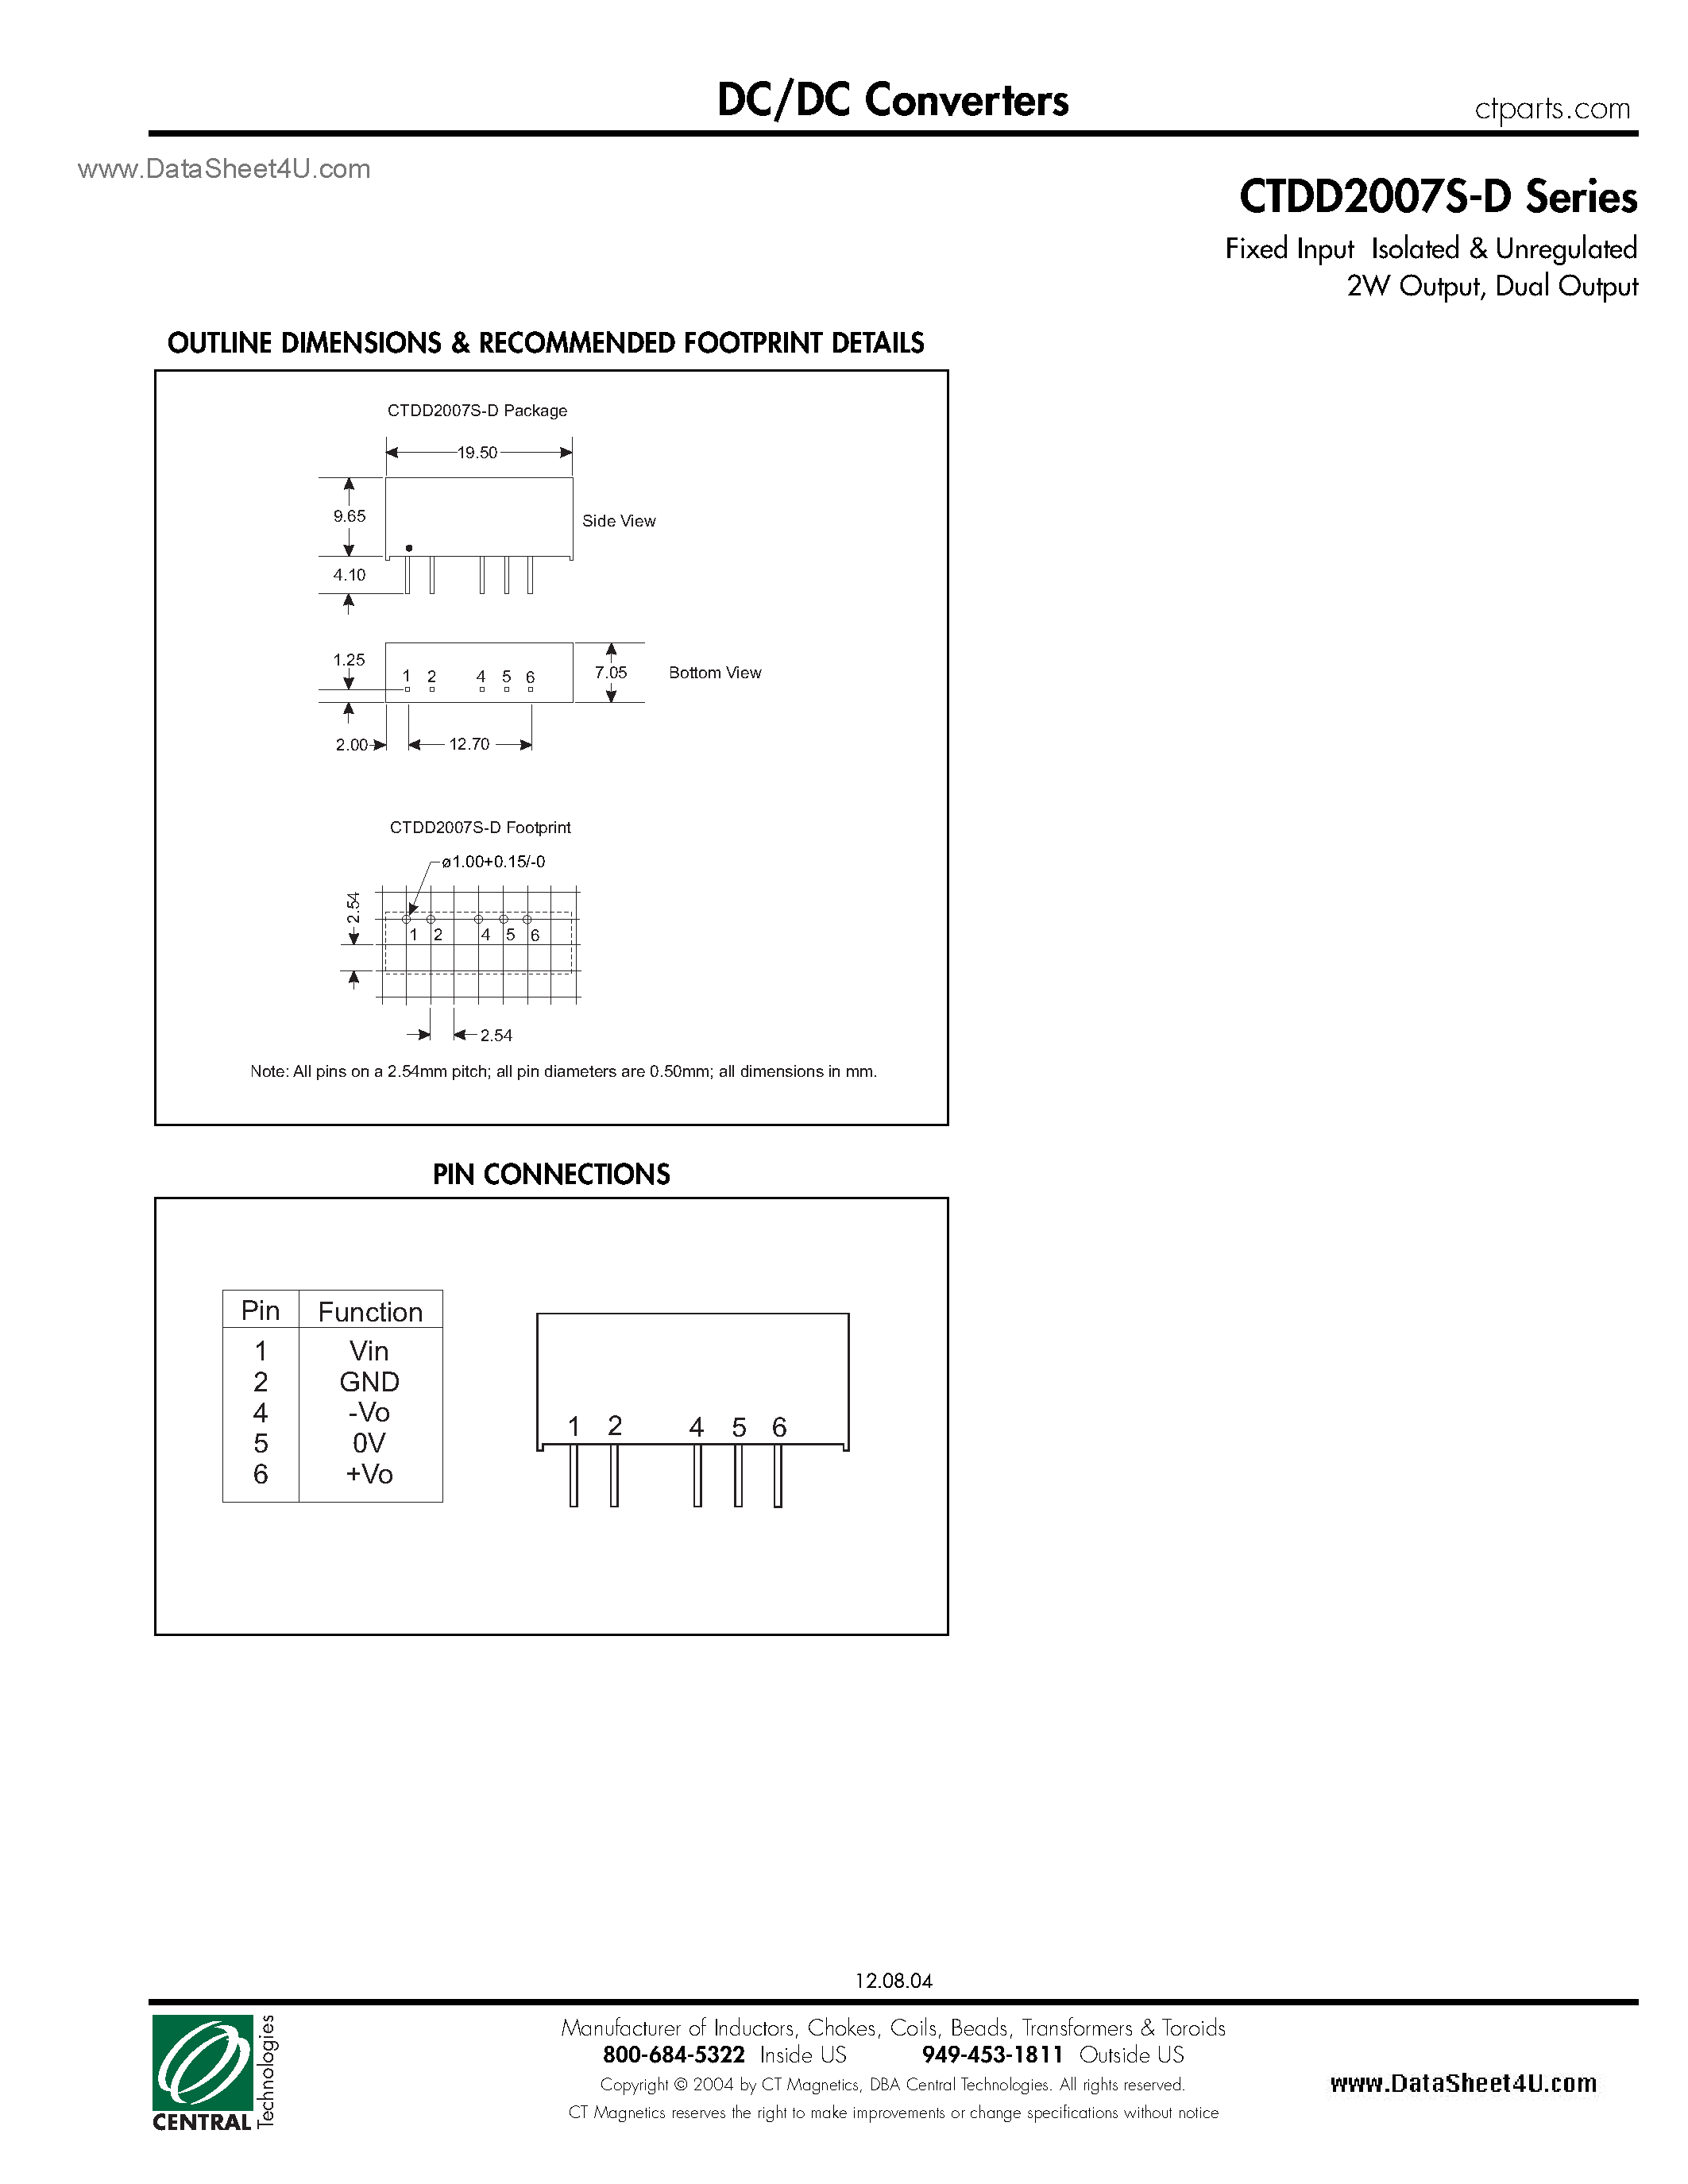 Datasheet CTDD2007S-D - DC/DC Converters page 2